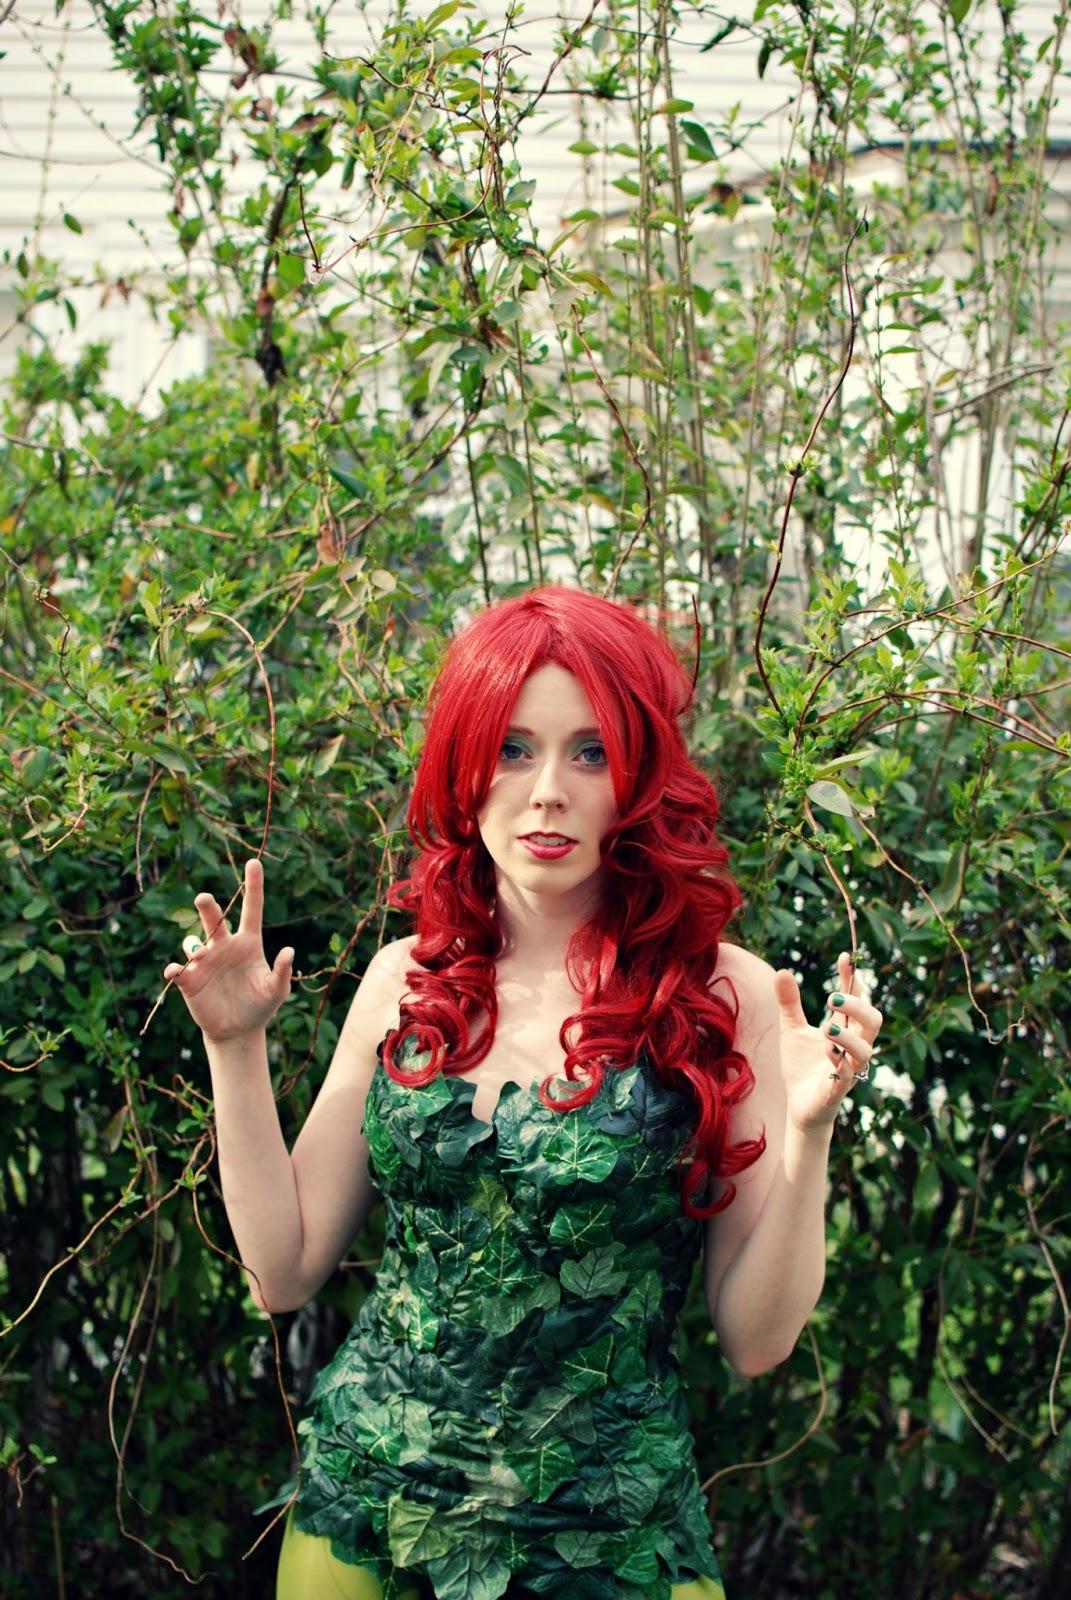 50+ Hot Pictures Of Poison Ivy – One Of The Most Beautiful Batman’s Villain 32